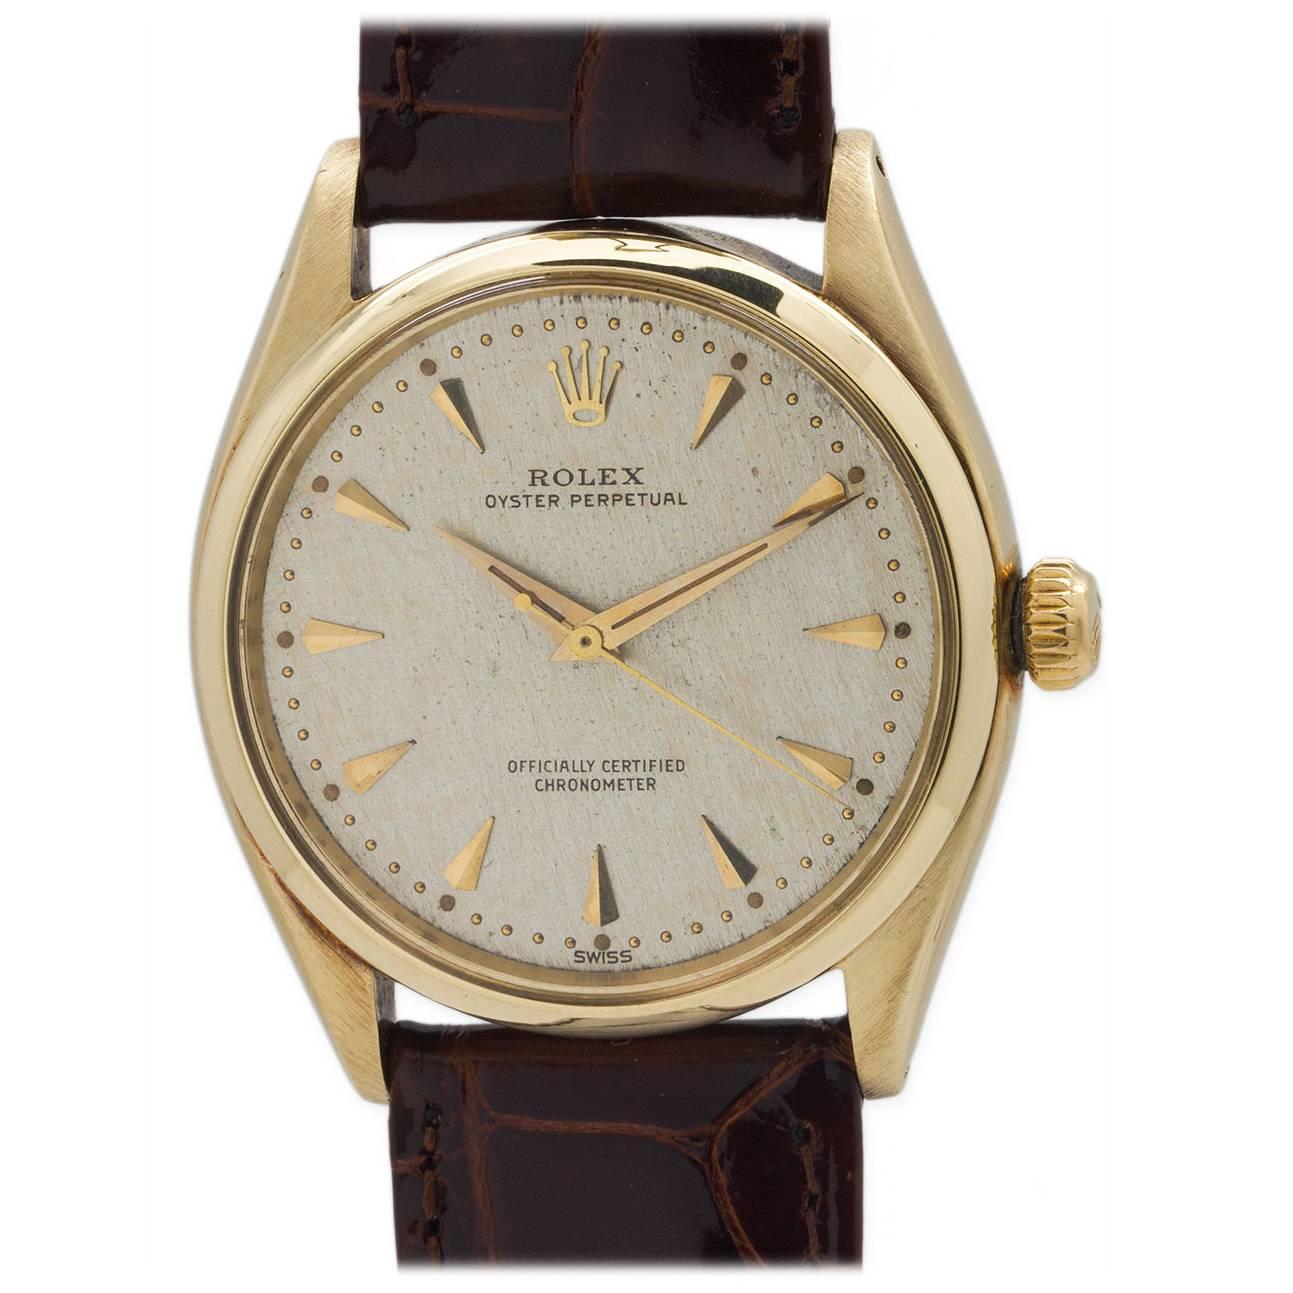 Rolex Yellow Gold Oyster Perpetual Wristwatch Ref 6564 circa 1960